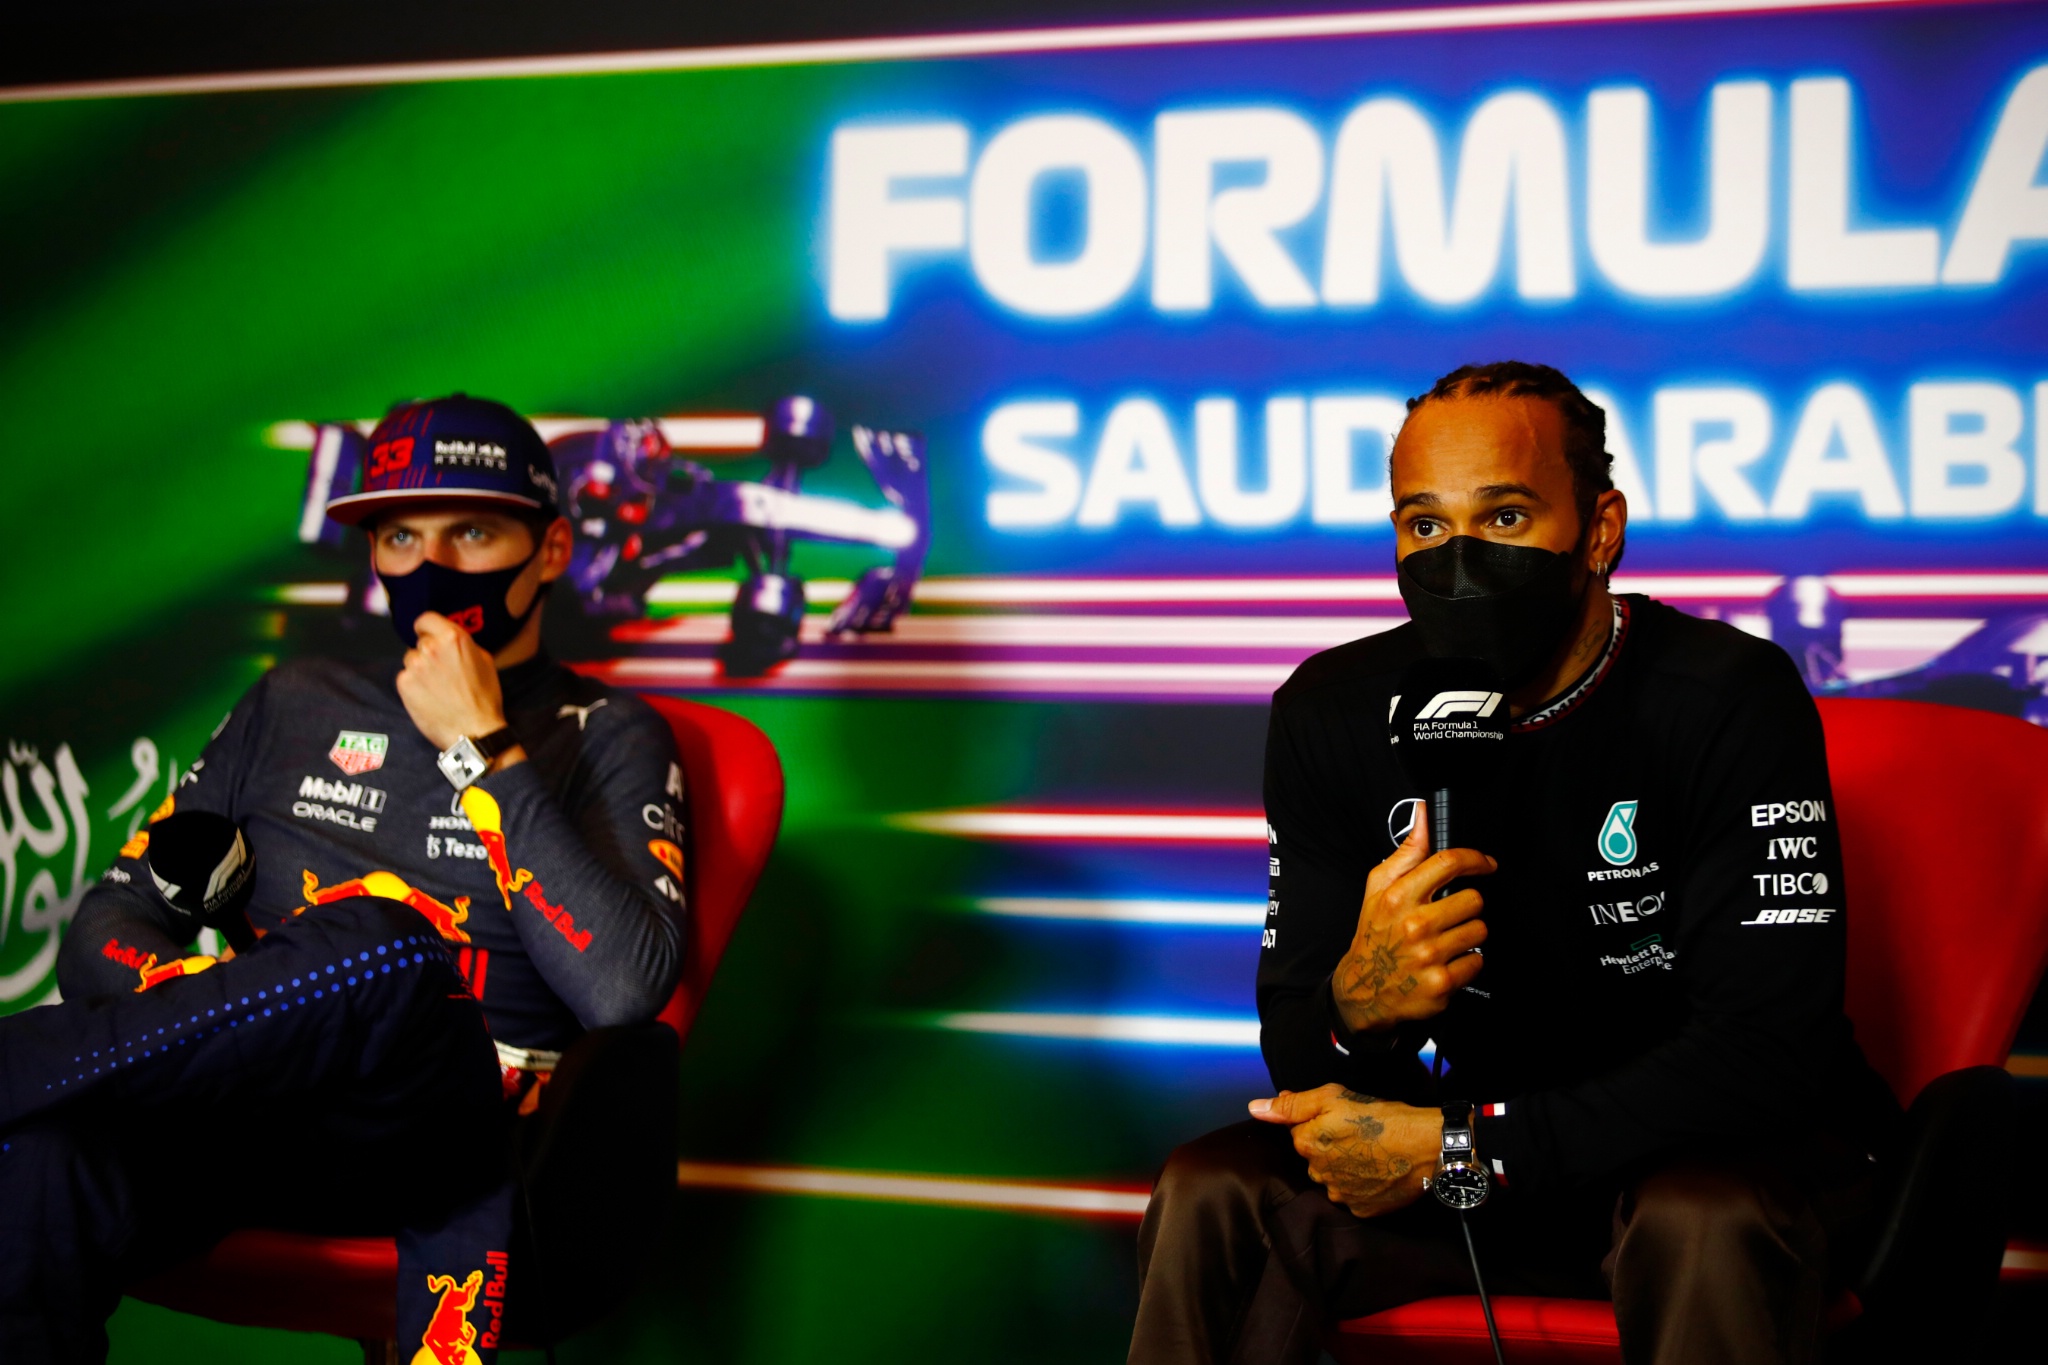 Lewis Hamilton (GBR) Mercedes AMG F1 and Max Verstappen (NLD) Red Bull Racing in the post race FIA Press Conference.